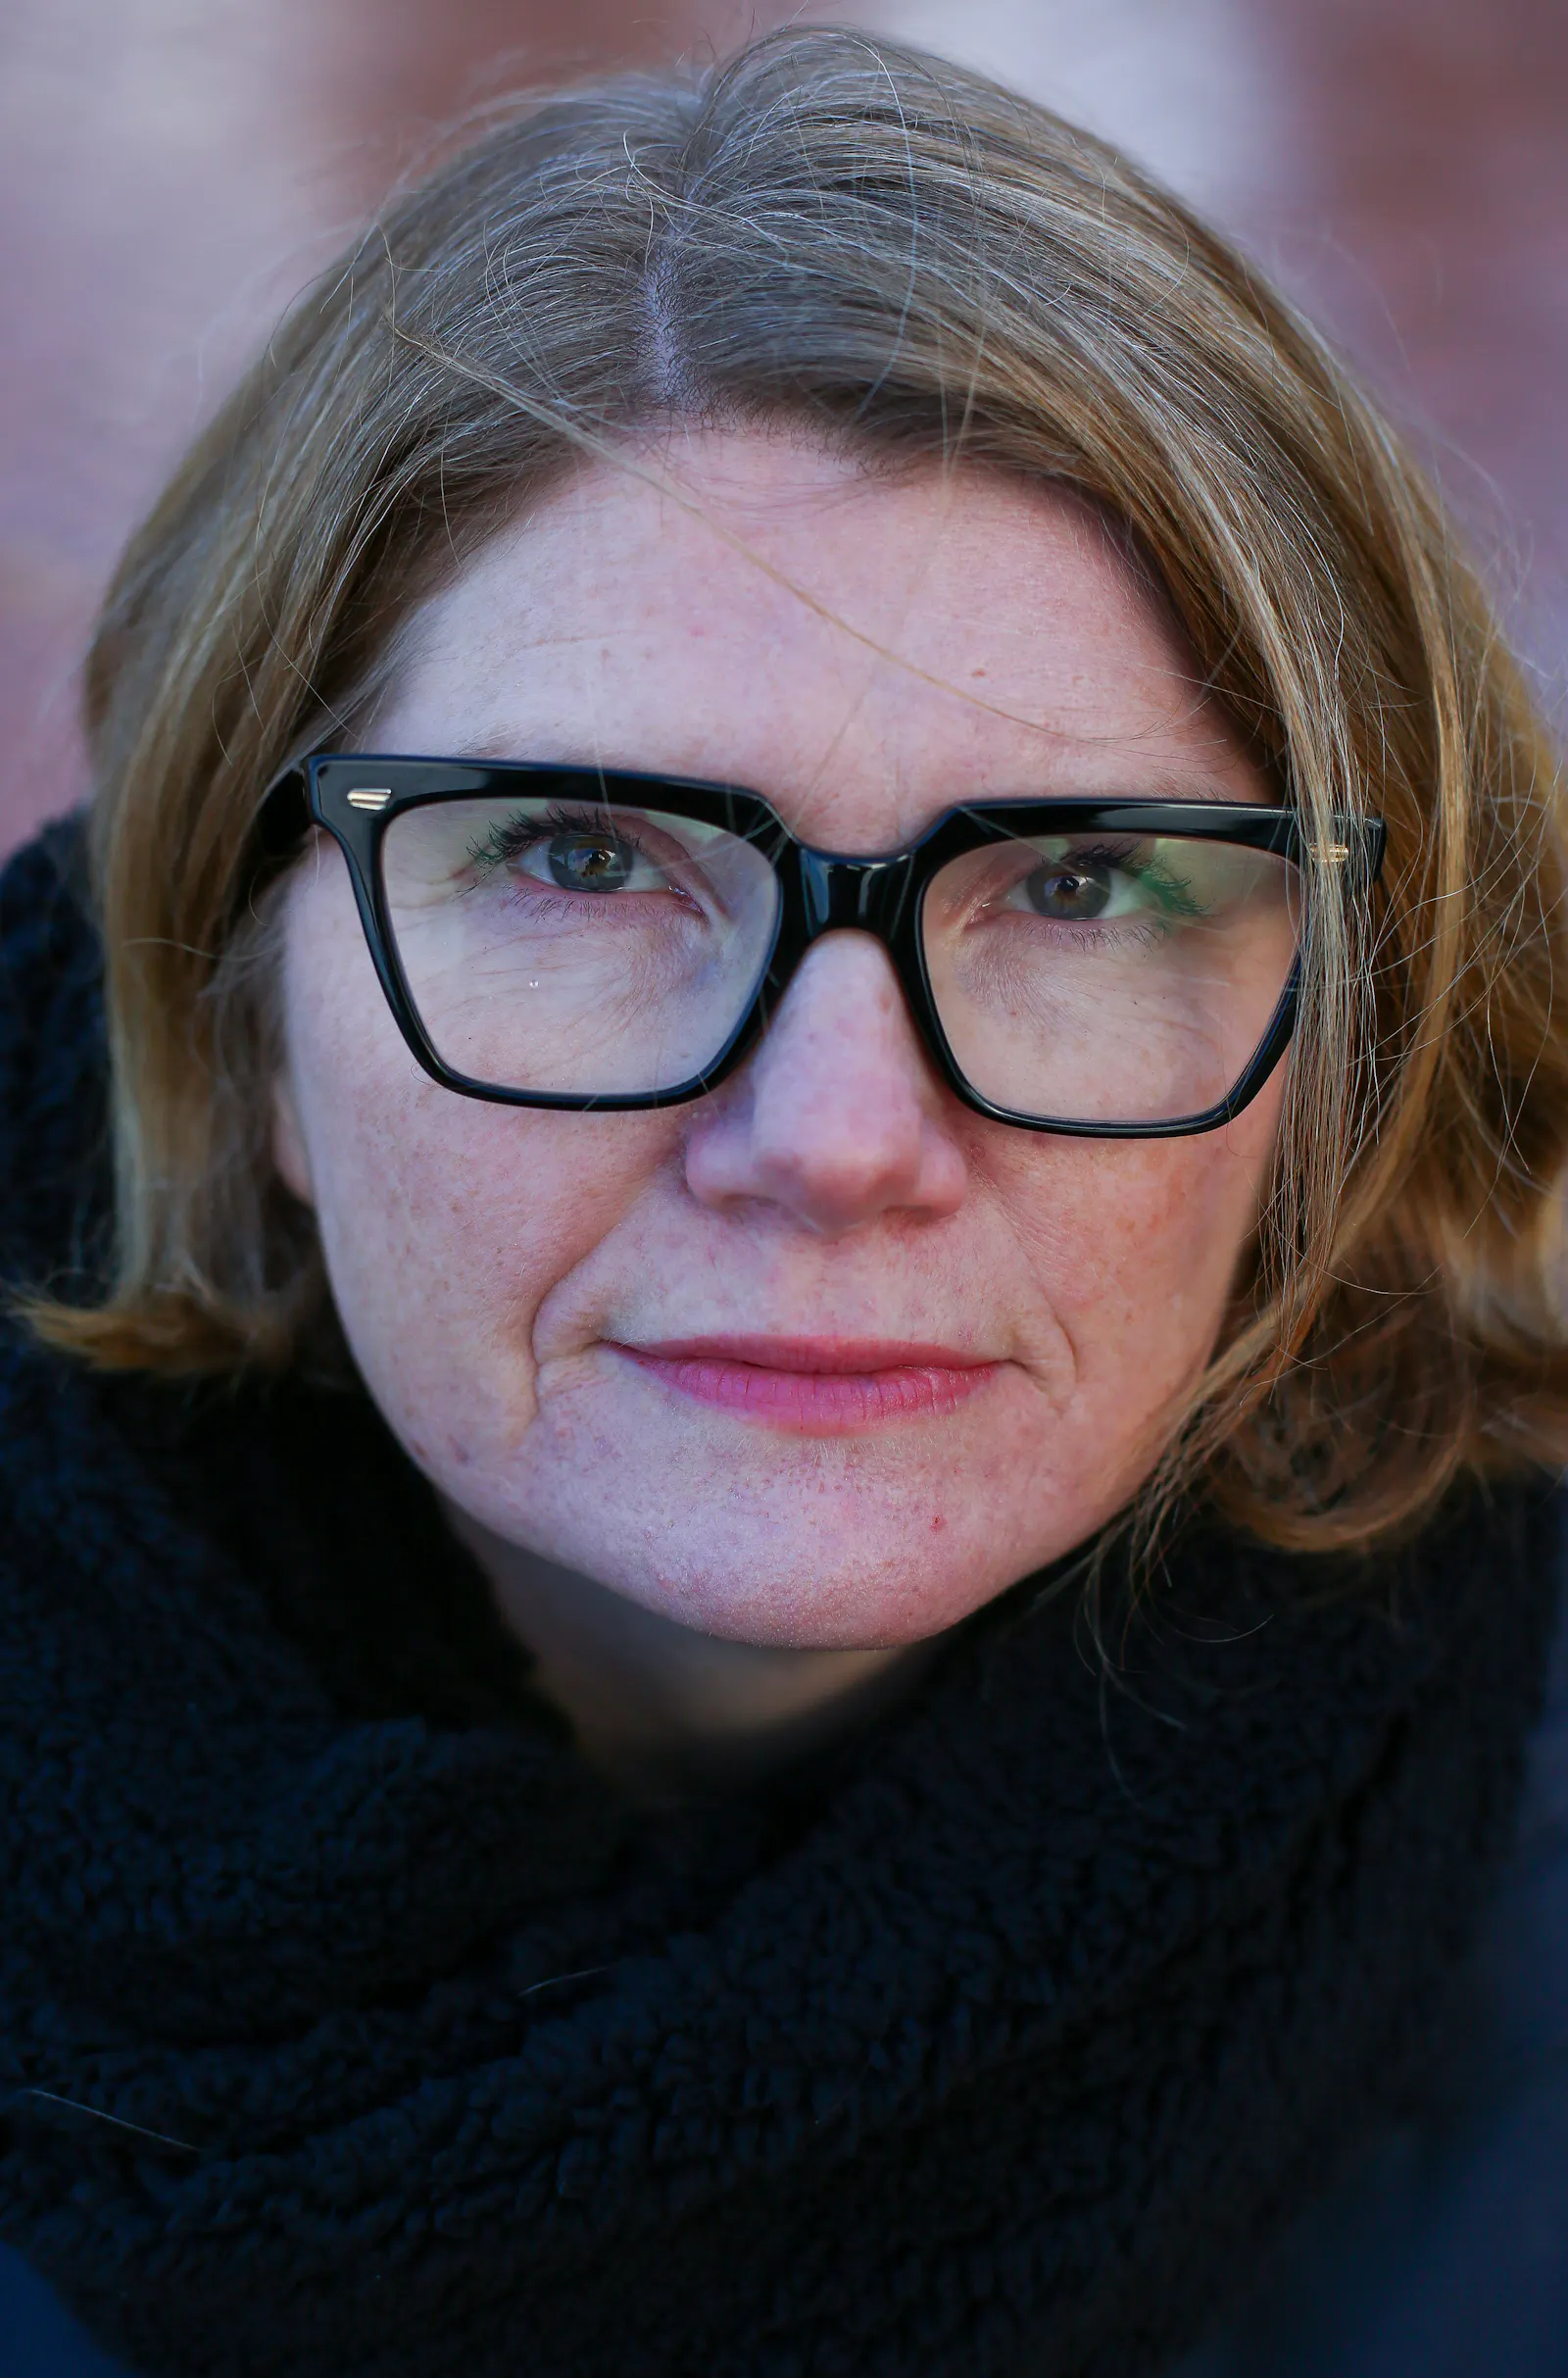 Cathy Rentzenbrink, a fortysomething women with fair hair cut in a bob, freckles and glasses